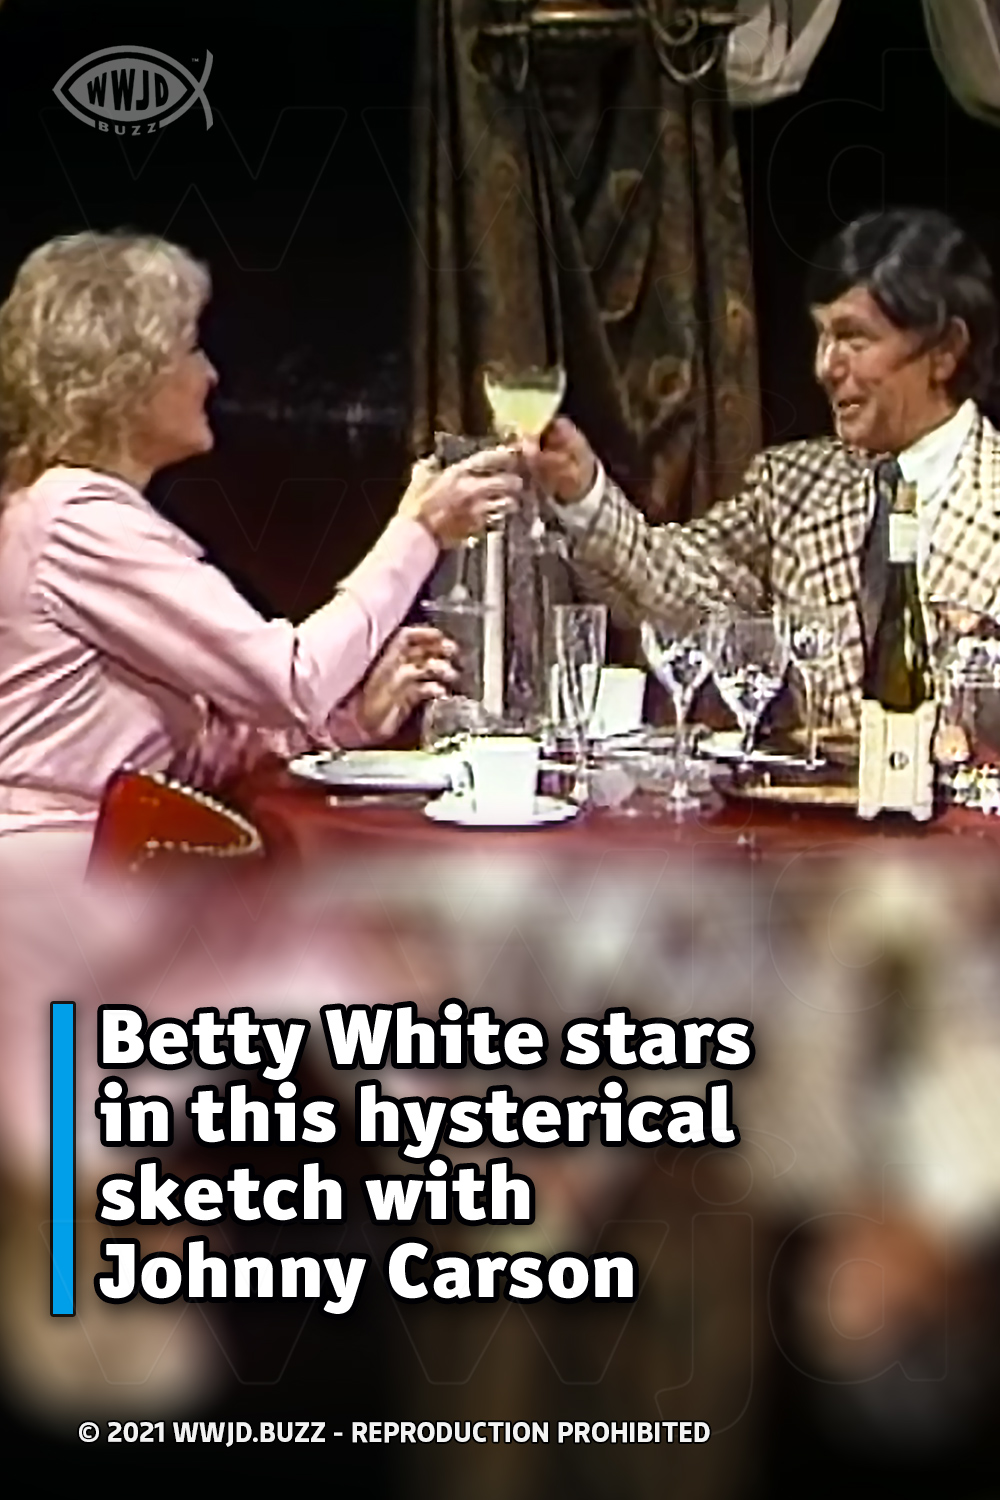 Betty White stars in this hysterical sketch with Johnny Carson